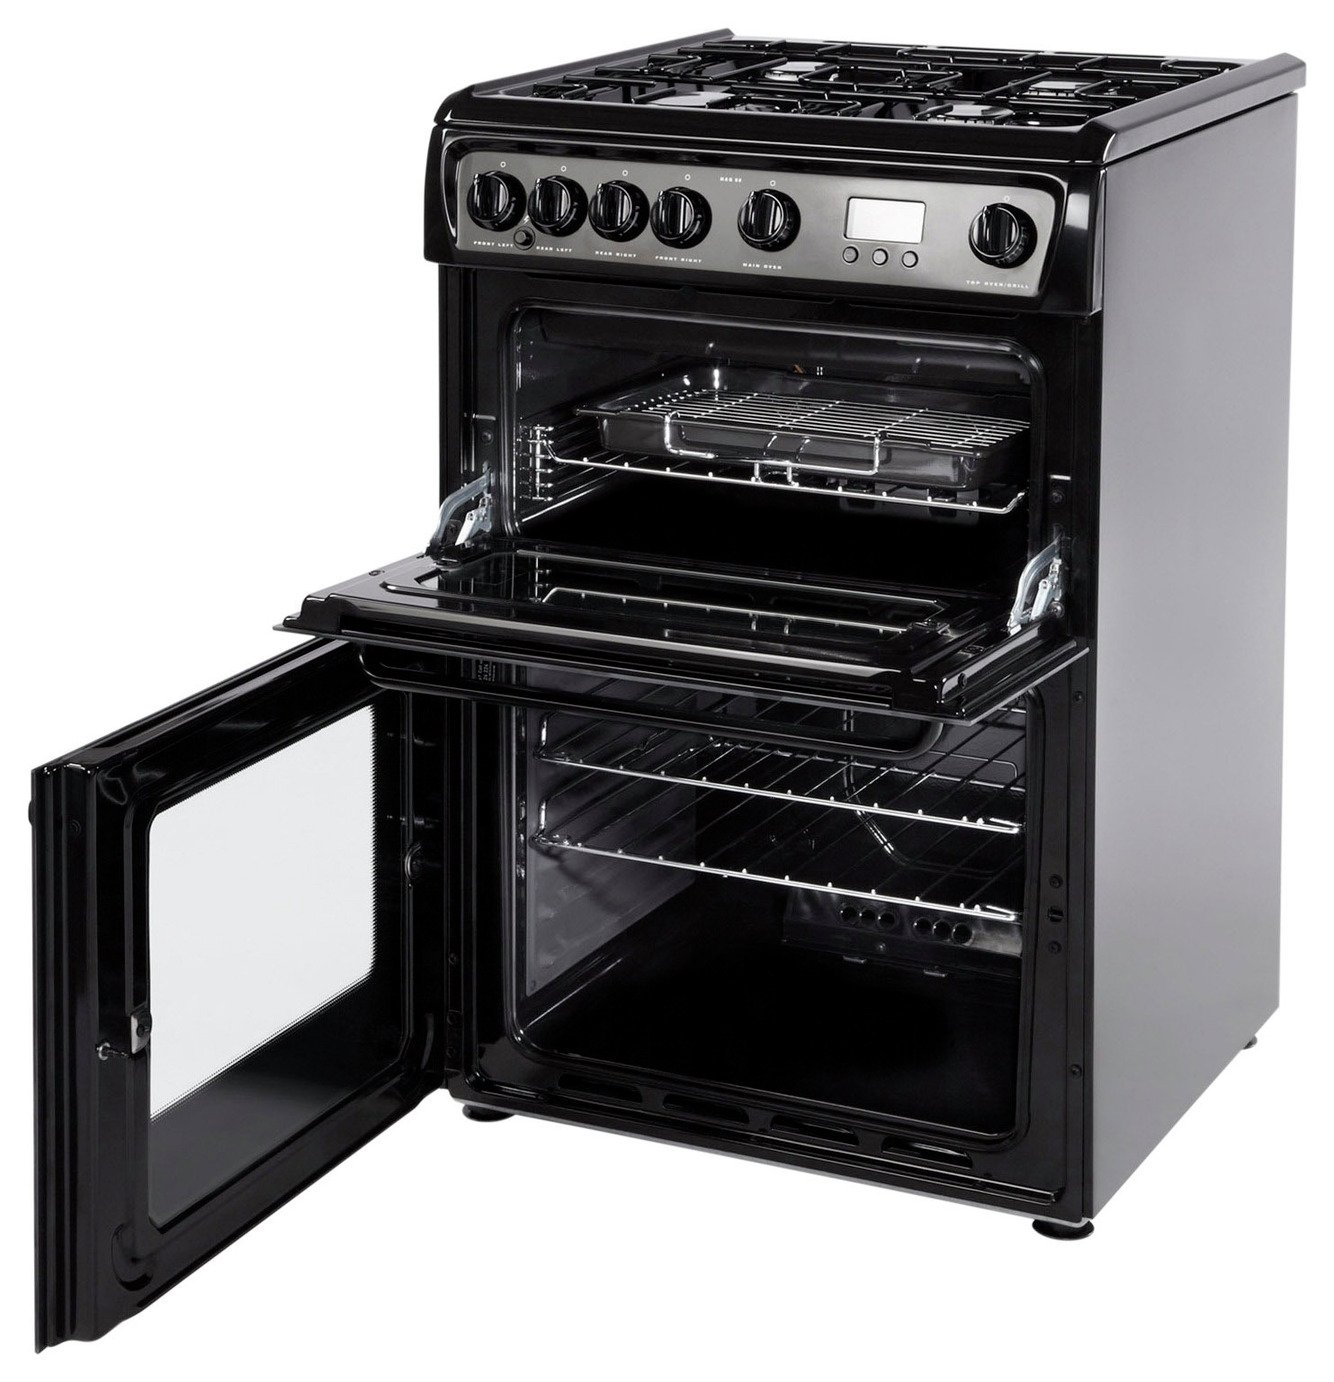 Hotpoint HAG60K 60cm Double Oven Gas Cooker Review